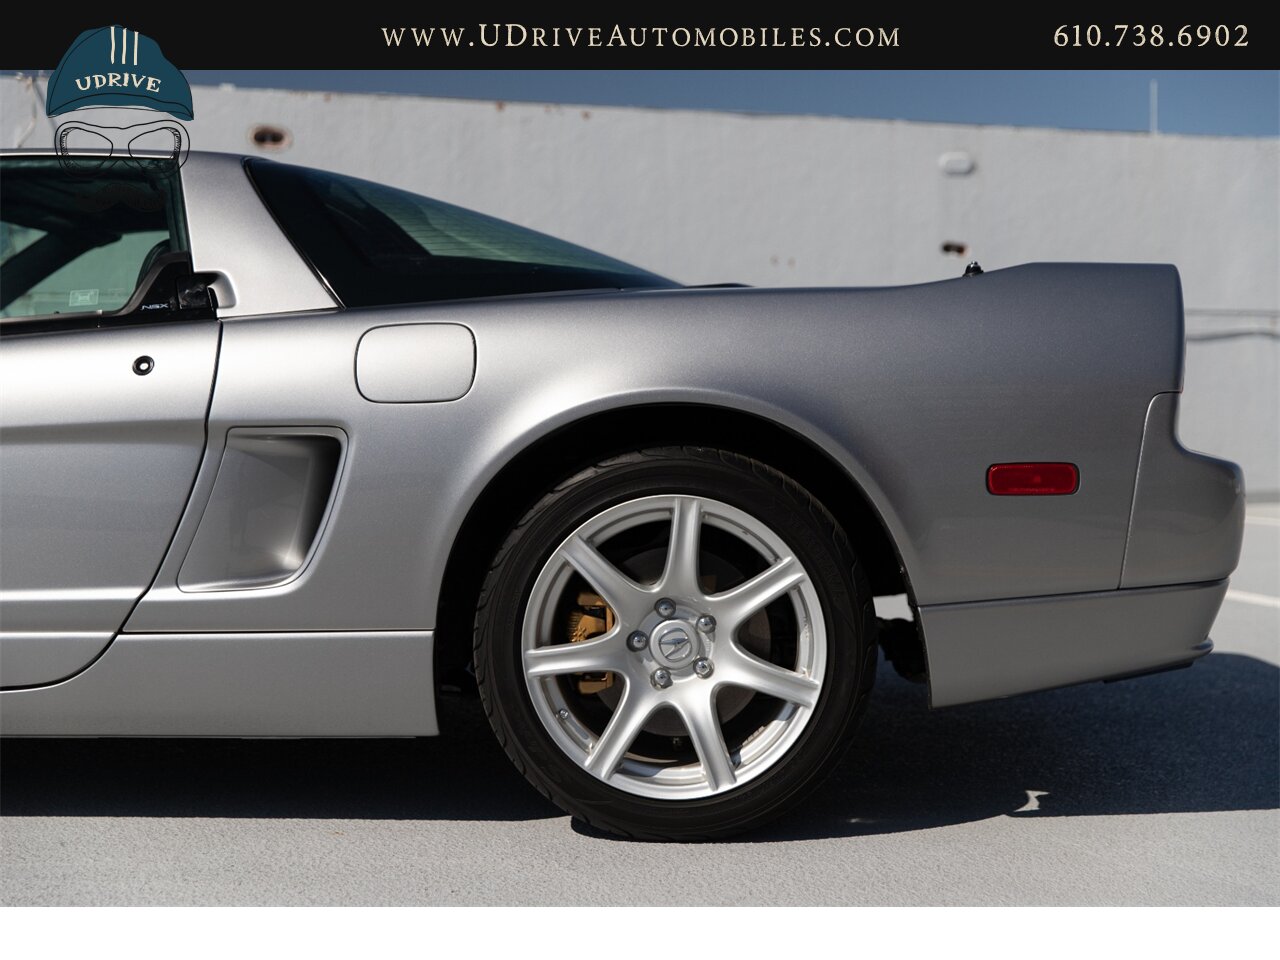 2002 Acura NSX NSX-T 9k Miles 6 Speed Manual Service History  Collector Grade - Photo 24 - West Chester, PA 19382